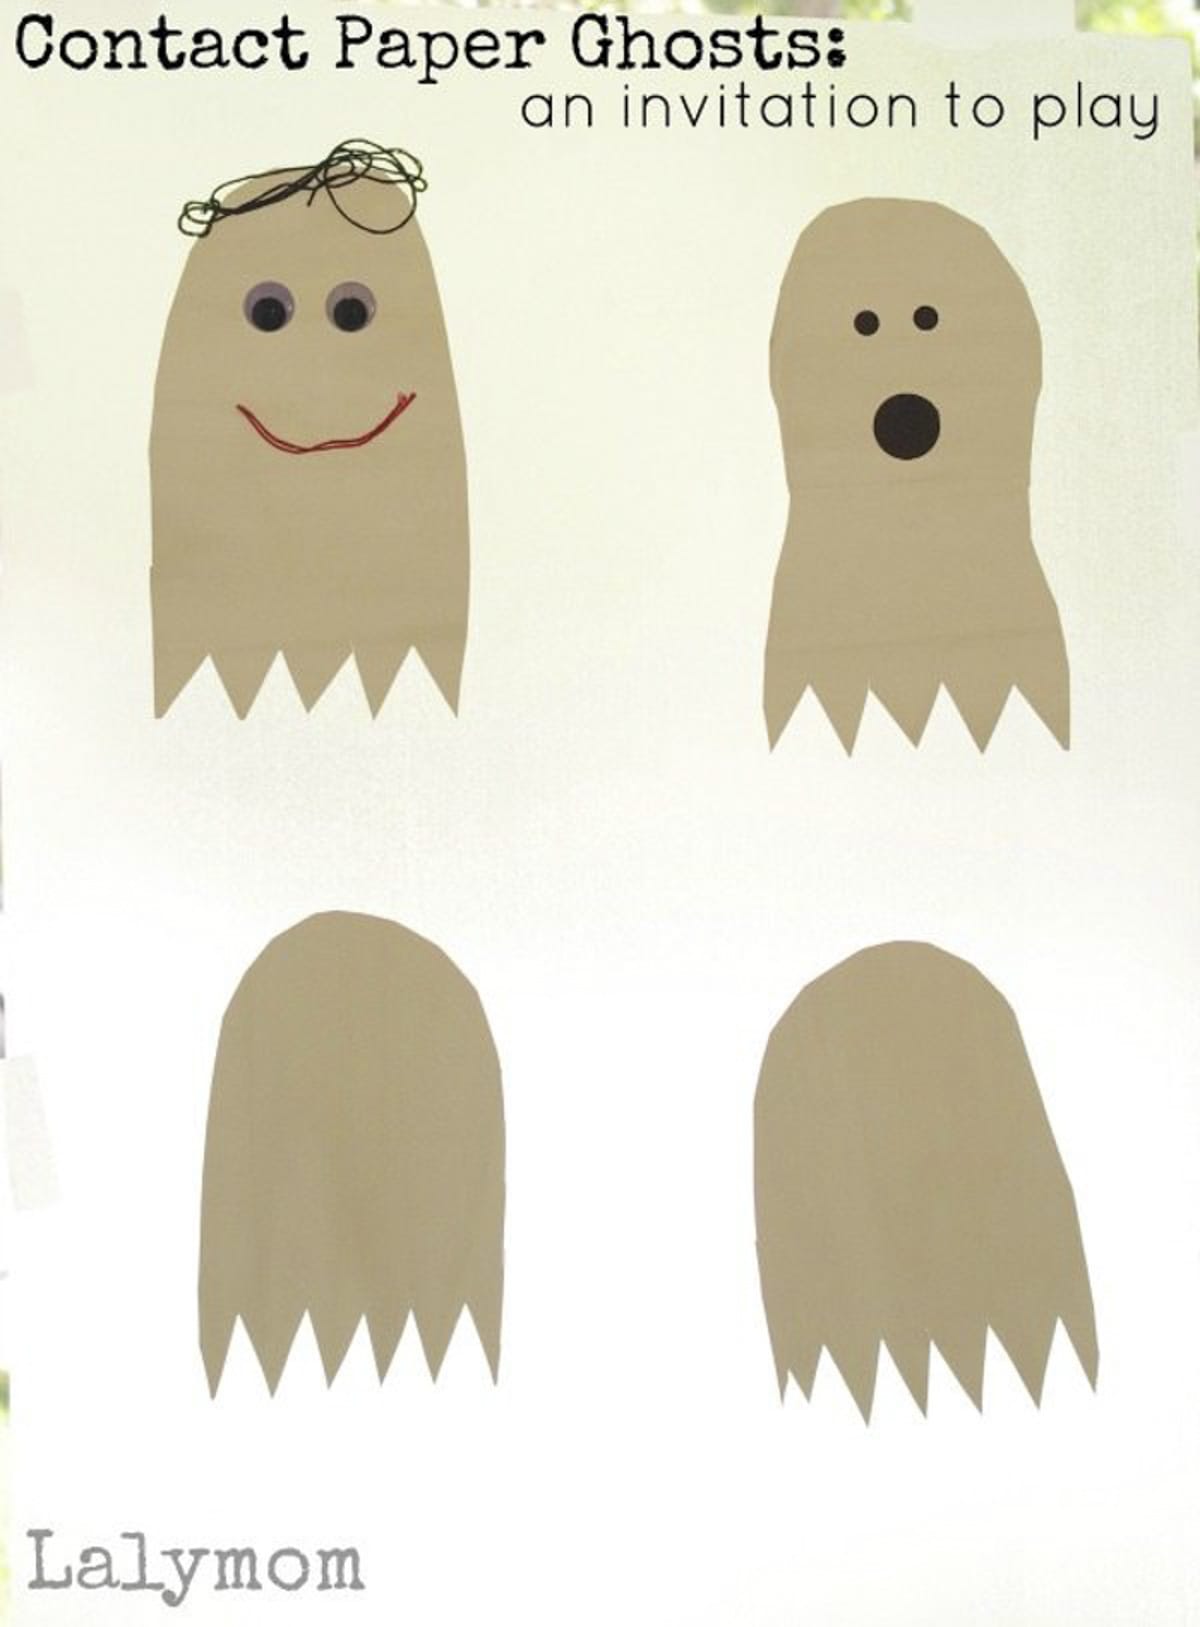 Contact Paper Ghost